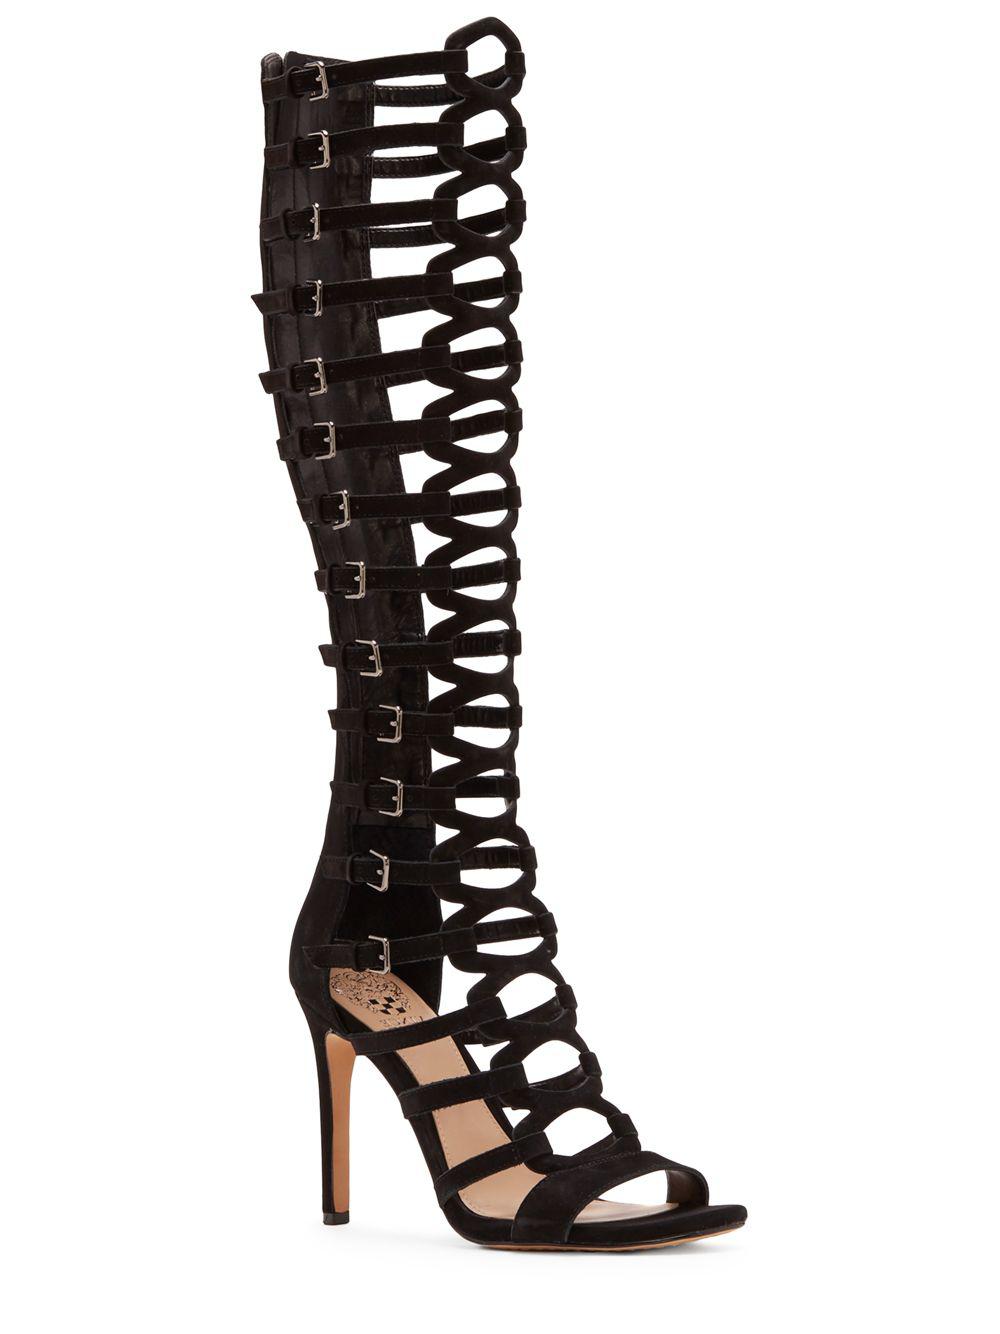 Vince Camuto Leather Chesta Overtheknee Gladiator Sandals in Black Lyst